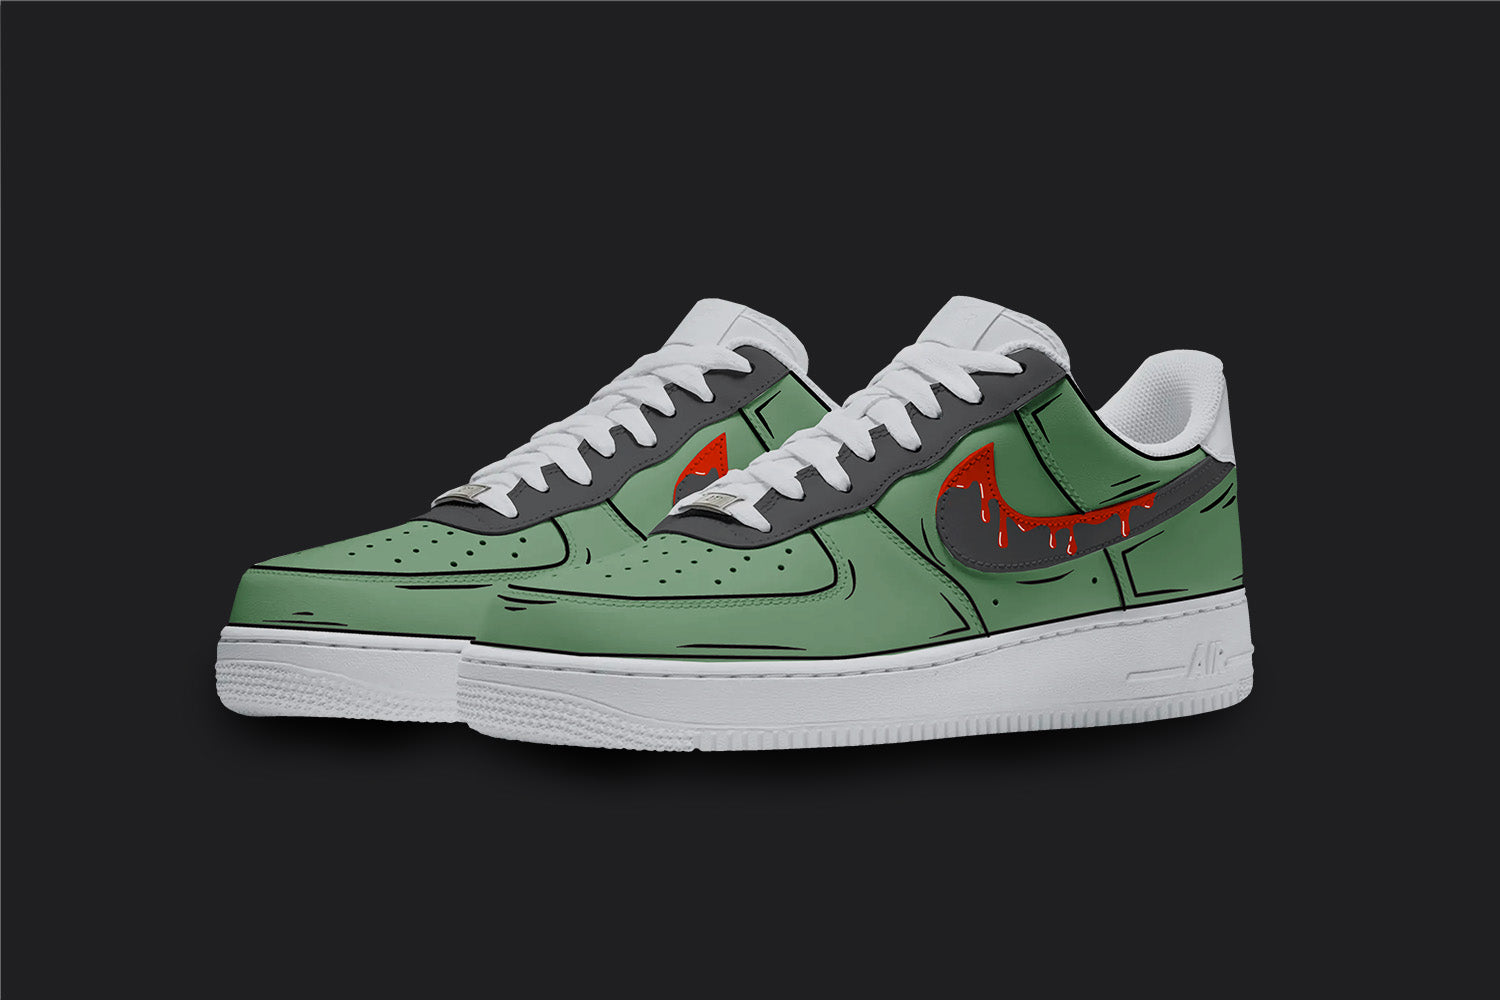 The image is of a Custom Nike Air force 1 sneaker pair on a blank black background. The white custom sneakers have a zombie green colorway with a dripping red nike logo on the sides.